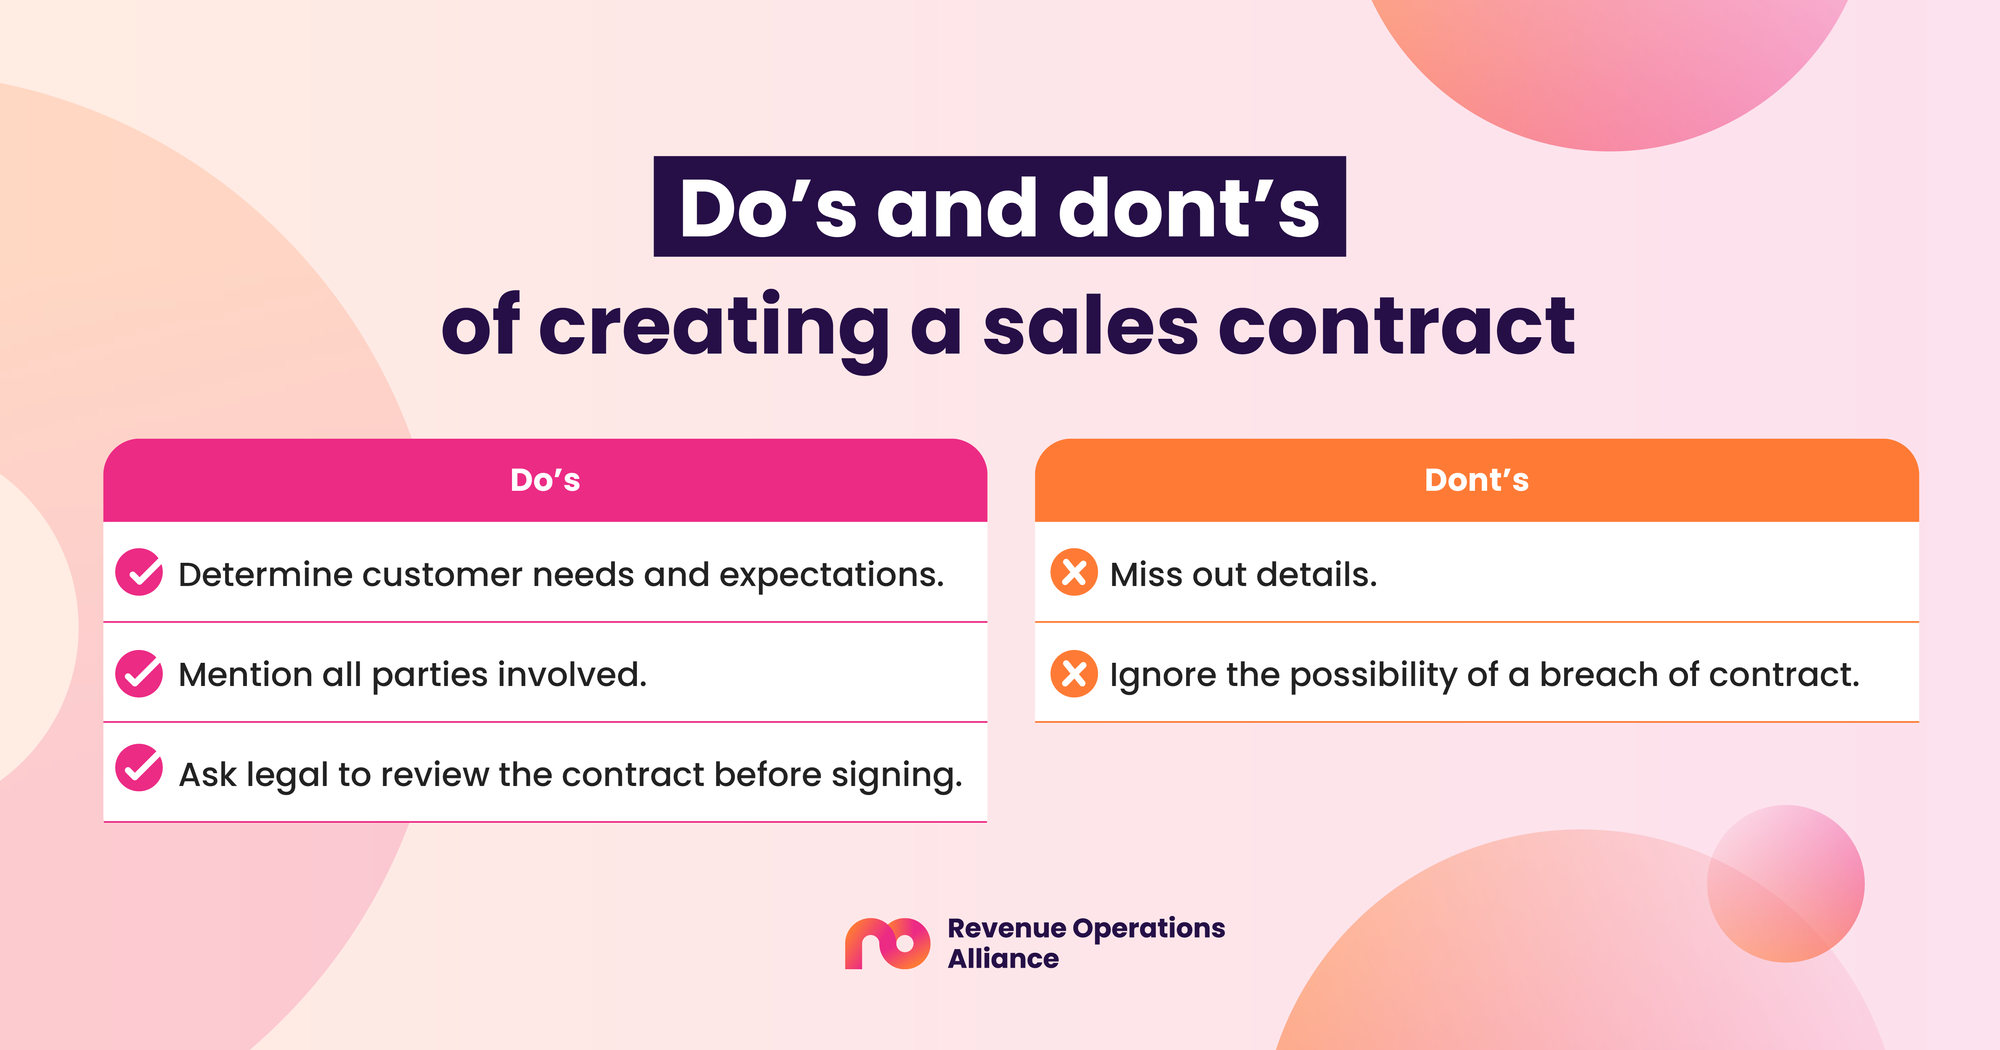 Do’s and don’ts of creating a sales contract Do: Determine customer needs and expectations.Mention all parties involved. Ask legal to review the contract before signing. Don’t: Miss out details. Ignore the possibility of a breach of contract. 